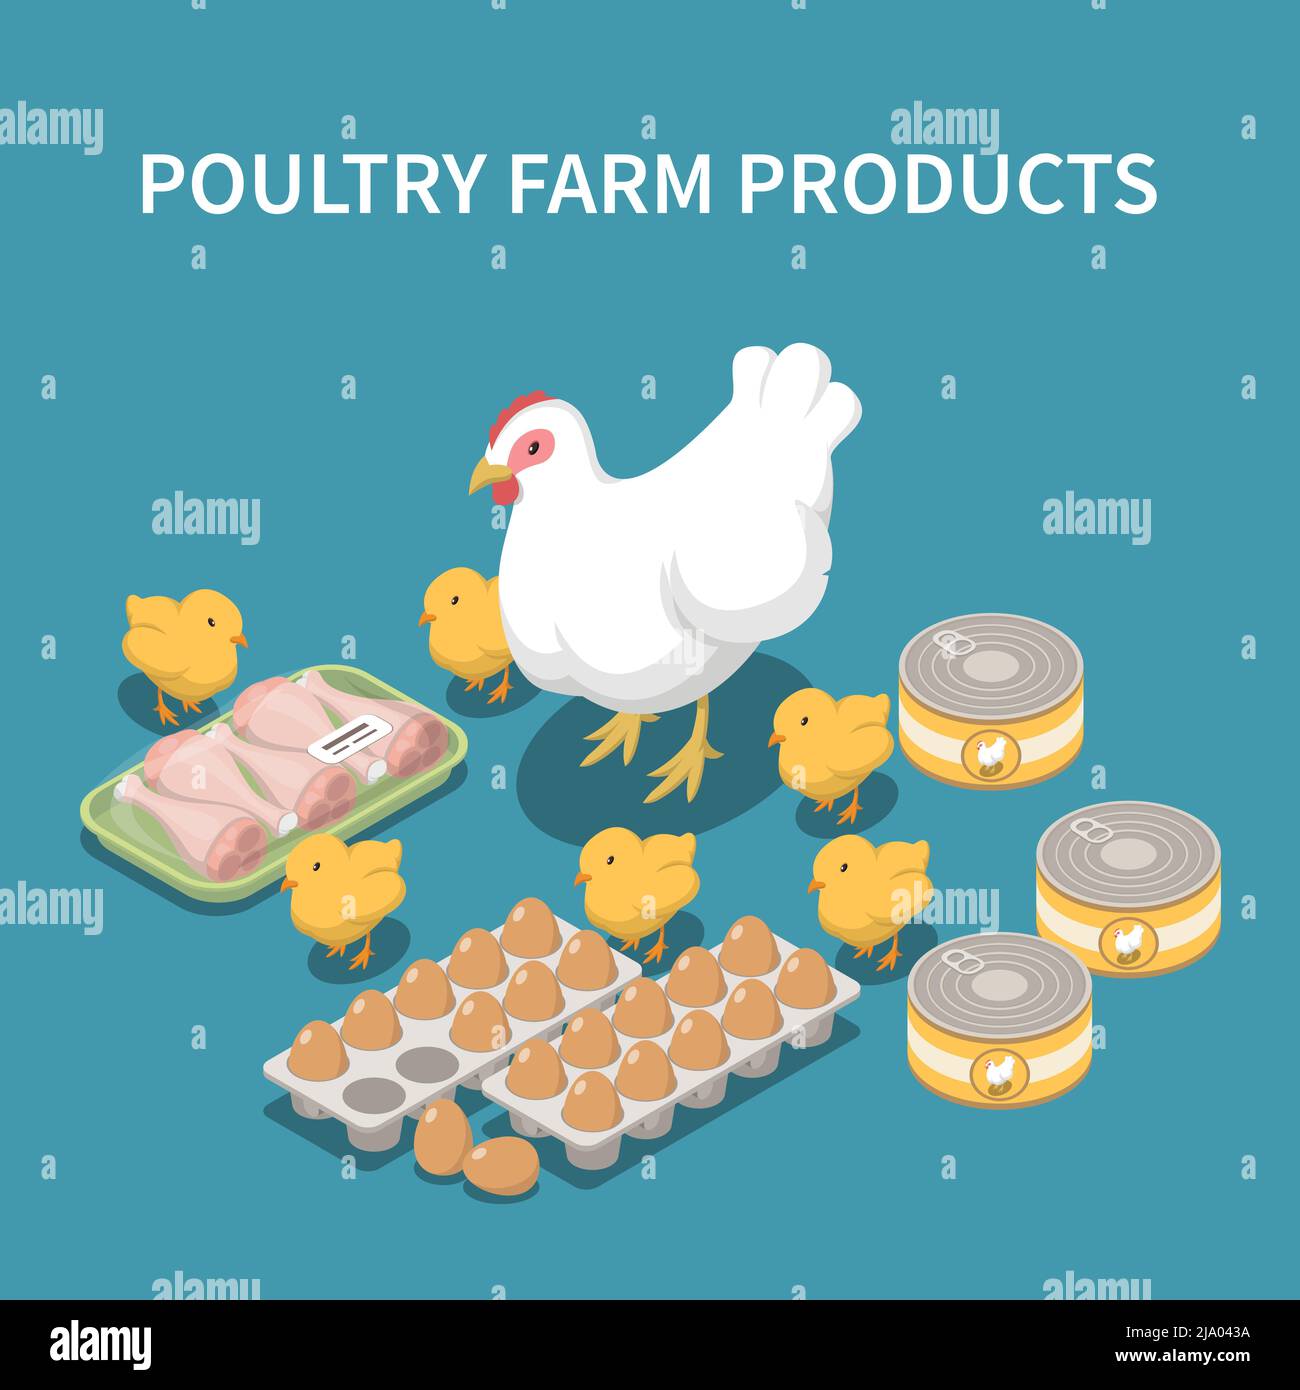 Poultry farm products blue background with live hen and chicks packaging of chicken legs tray of eggs canned turkey isometric icons vector illustratio Stock Vector